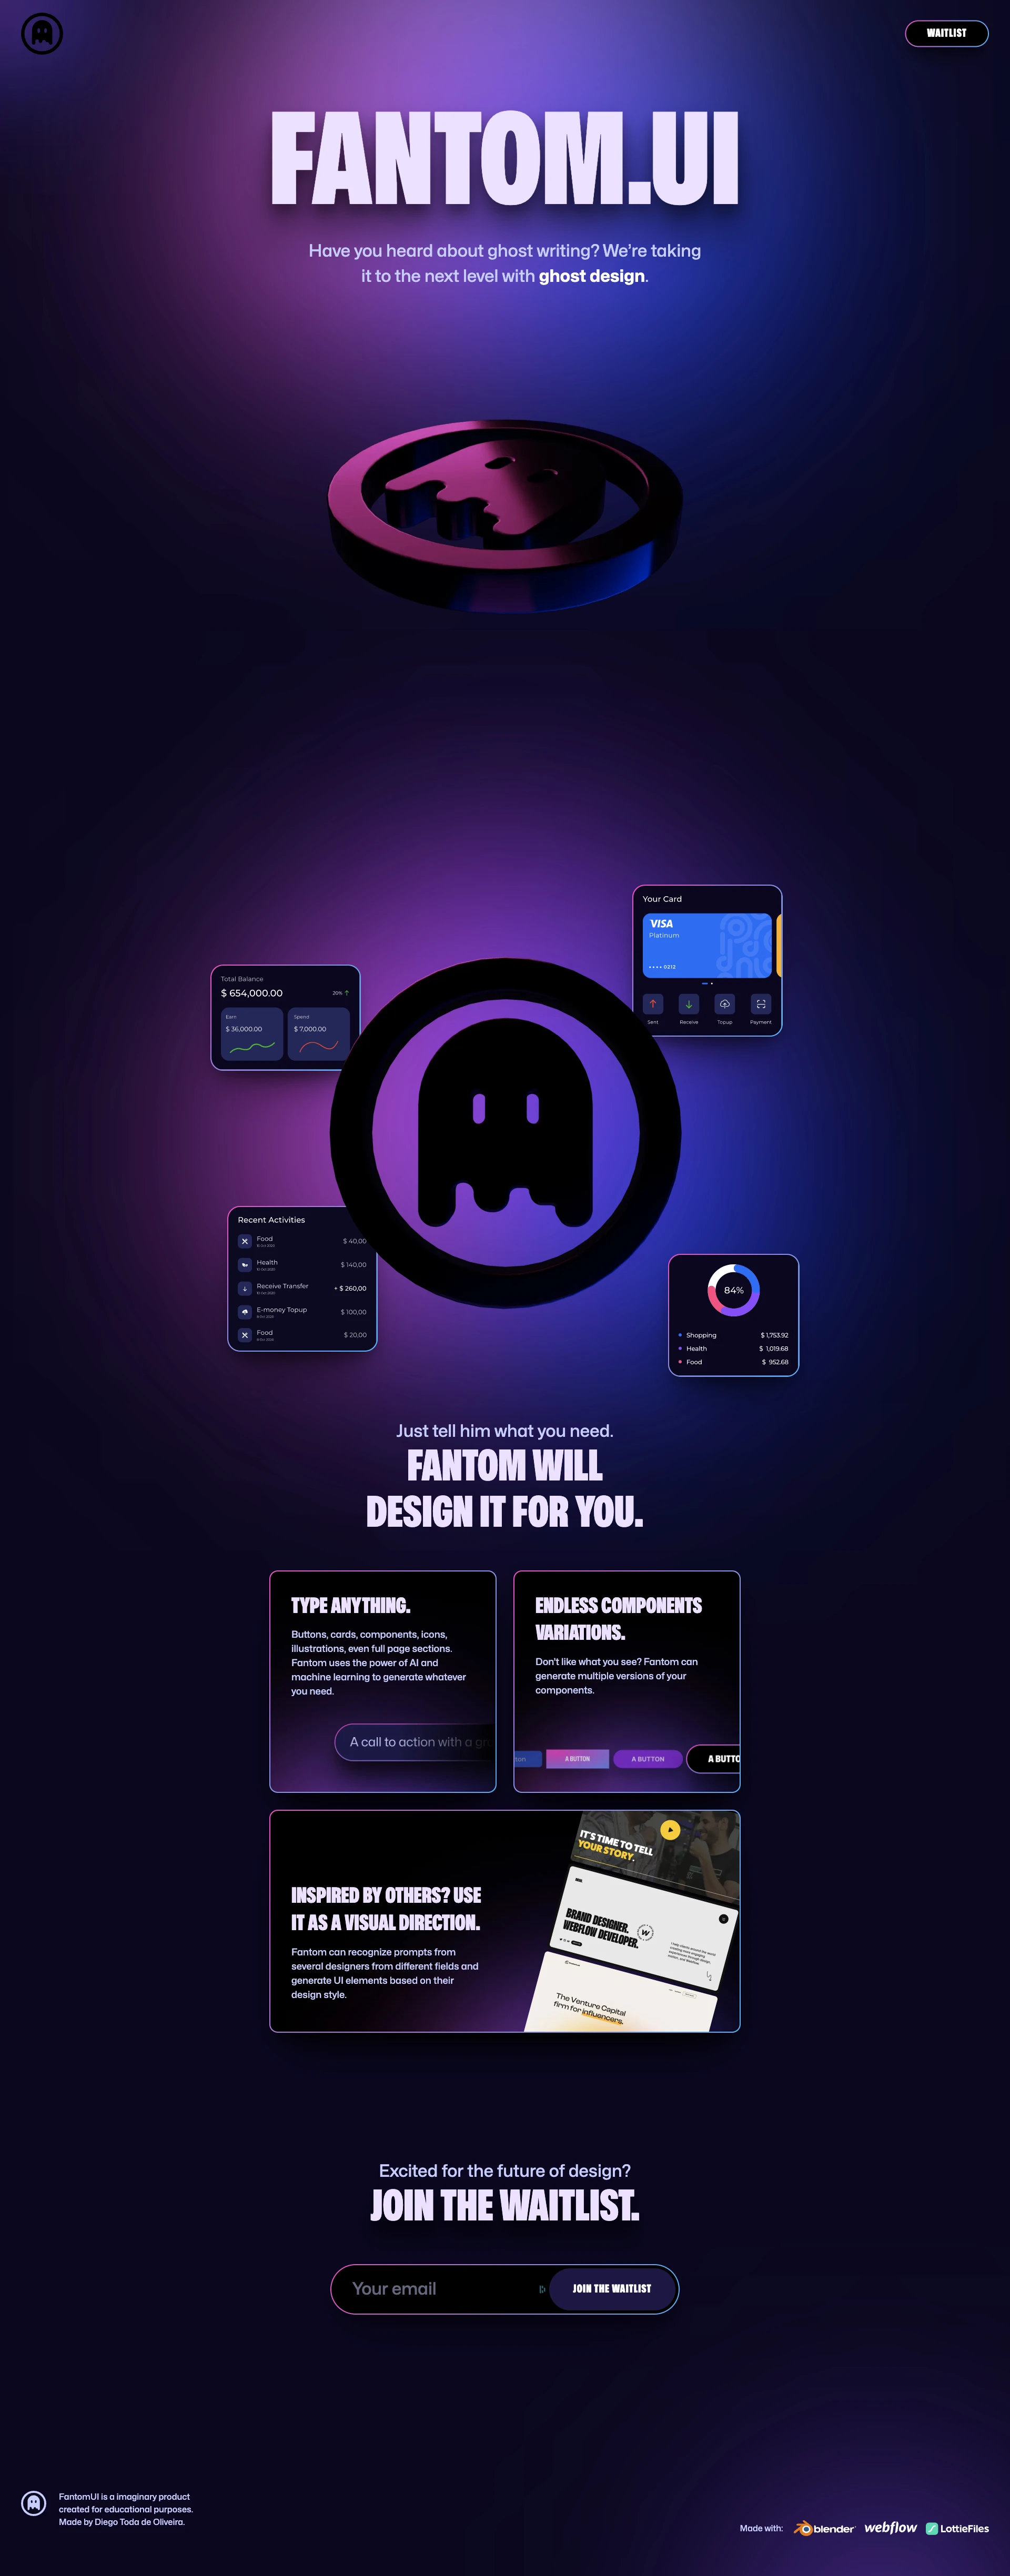 Fantom.UI Free Webflow Landing Page - The perfect starting point for building a unique website without starting from scratch. Free Webflow template with a modern design, responsive layout and all the features you need.